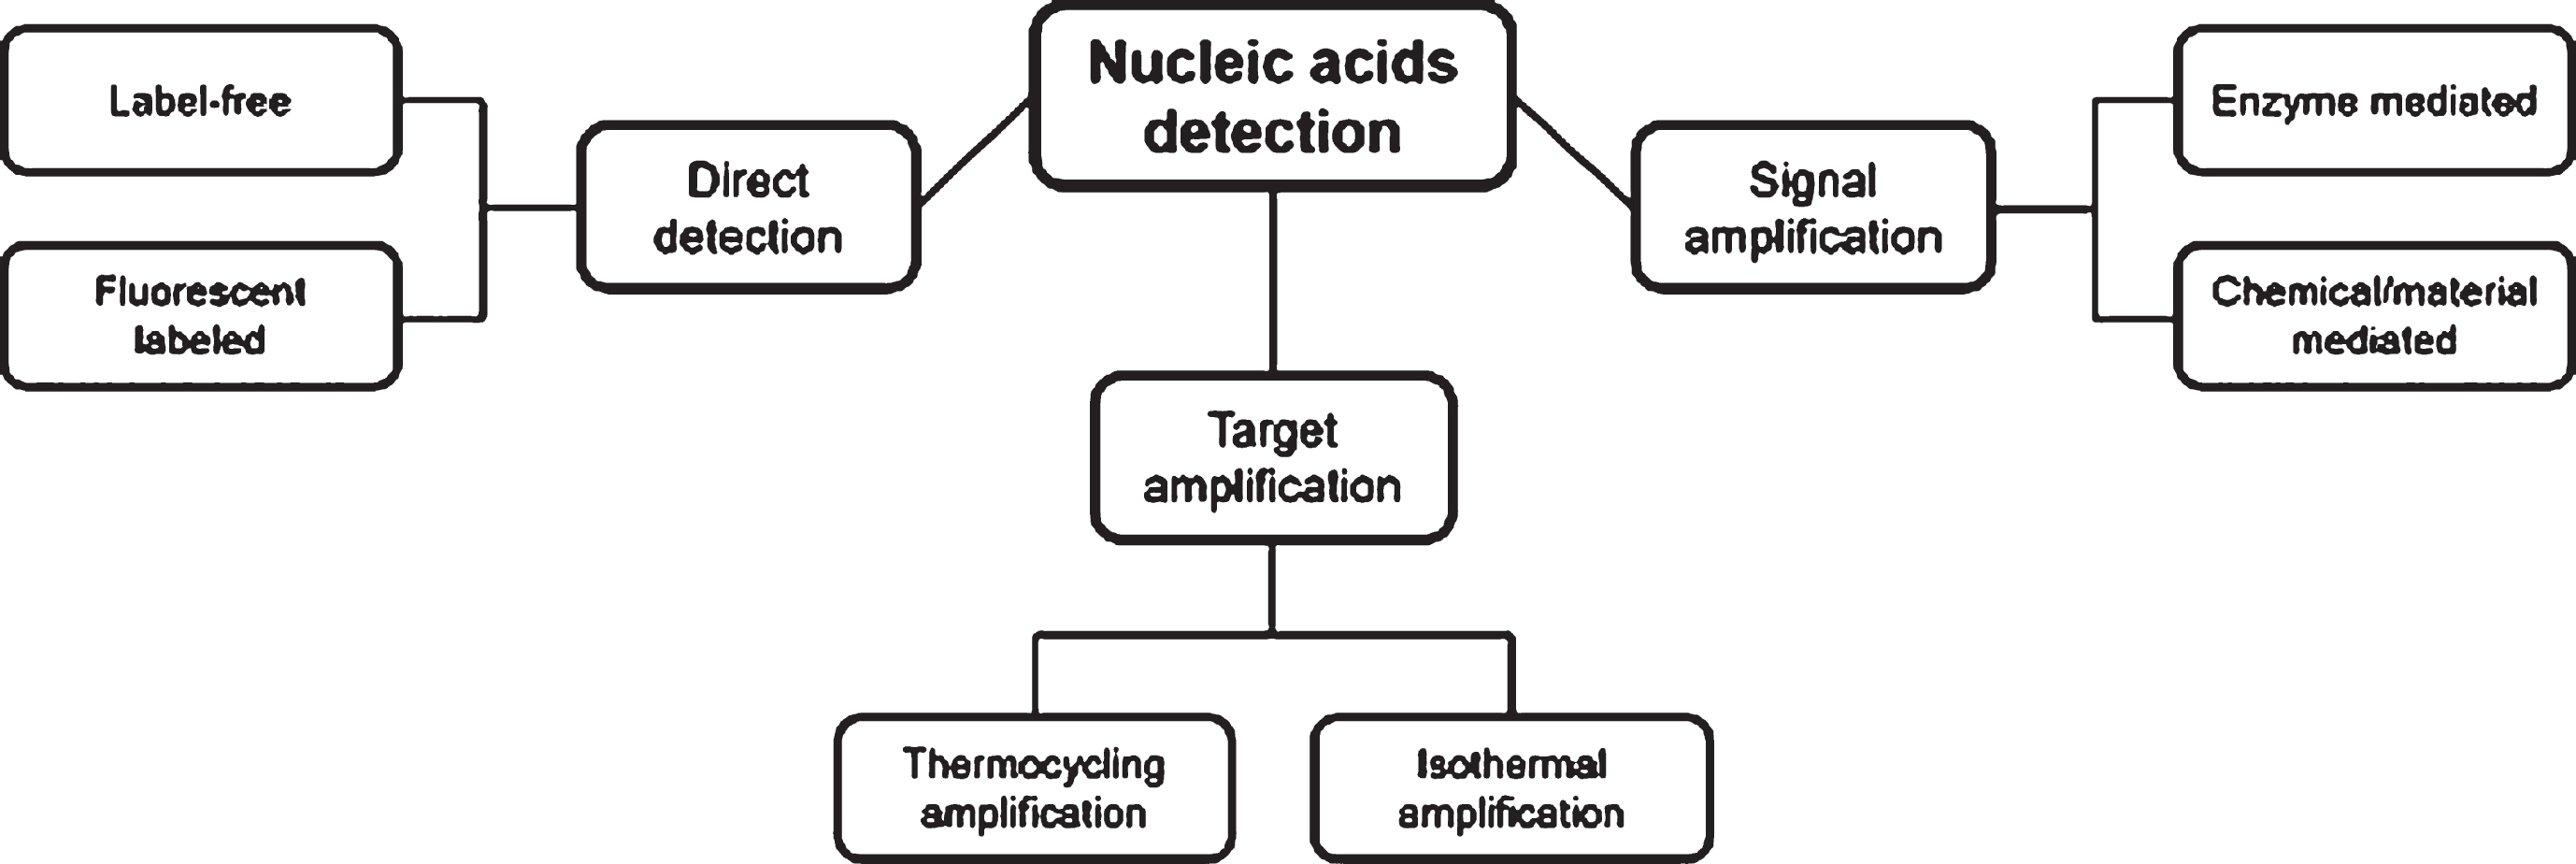 The strategies of nucleic acids detection.